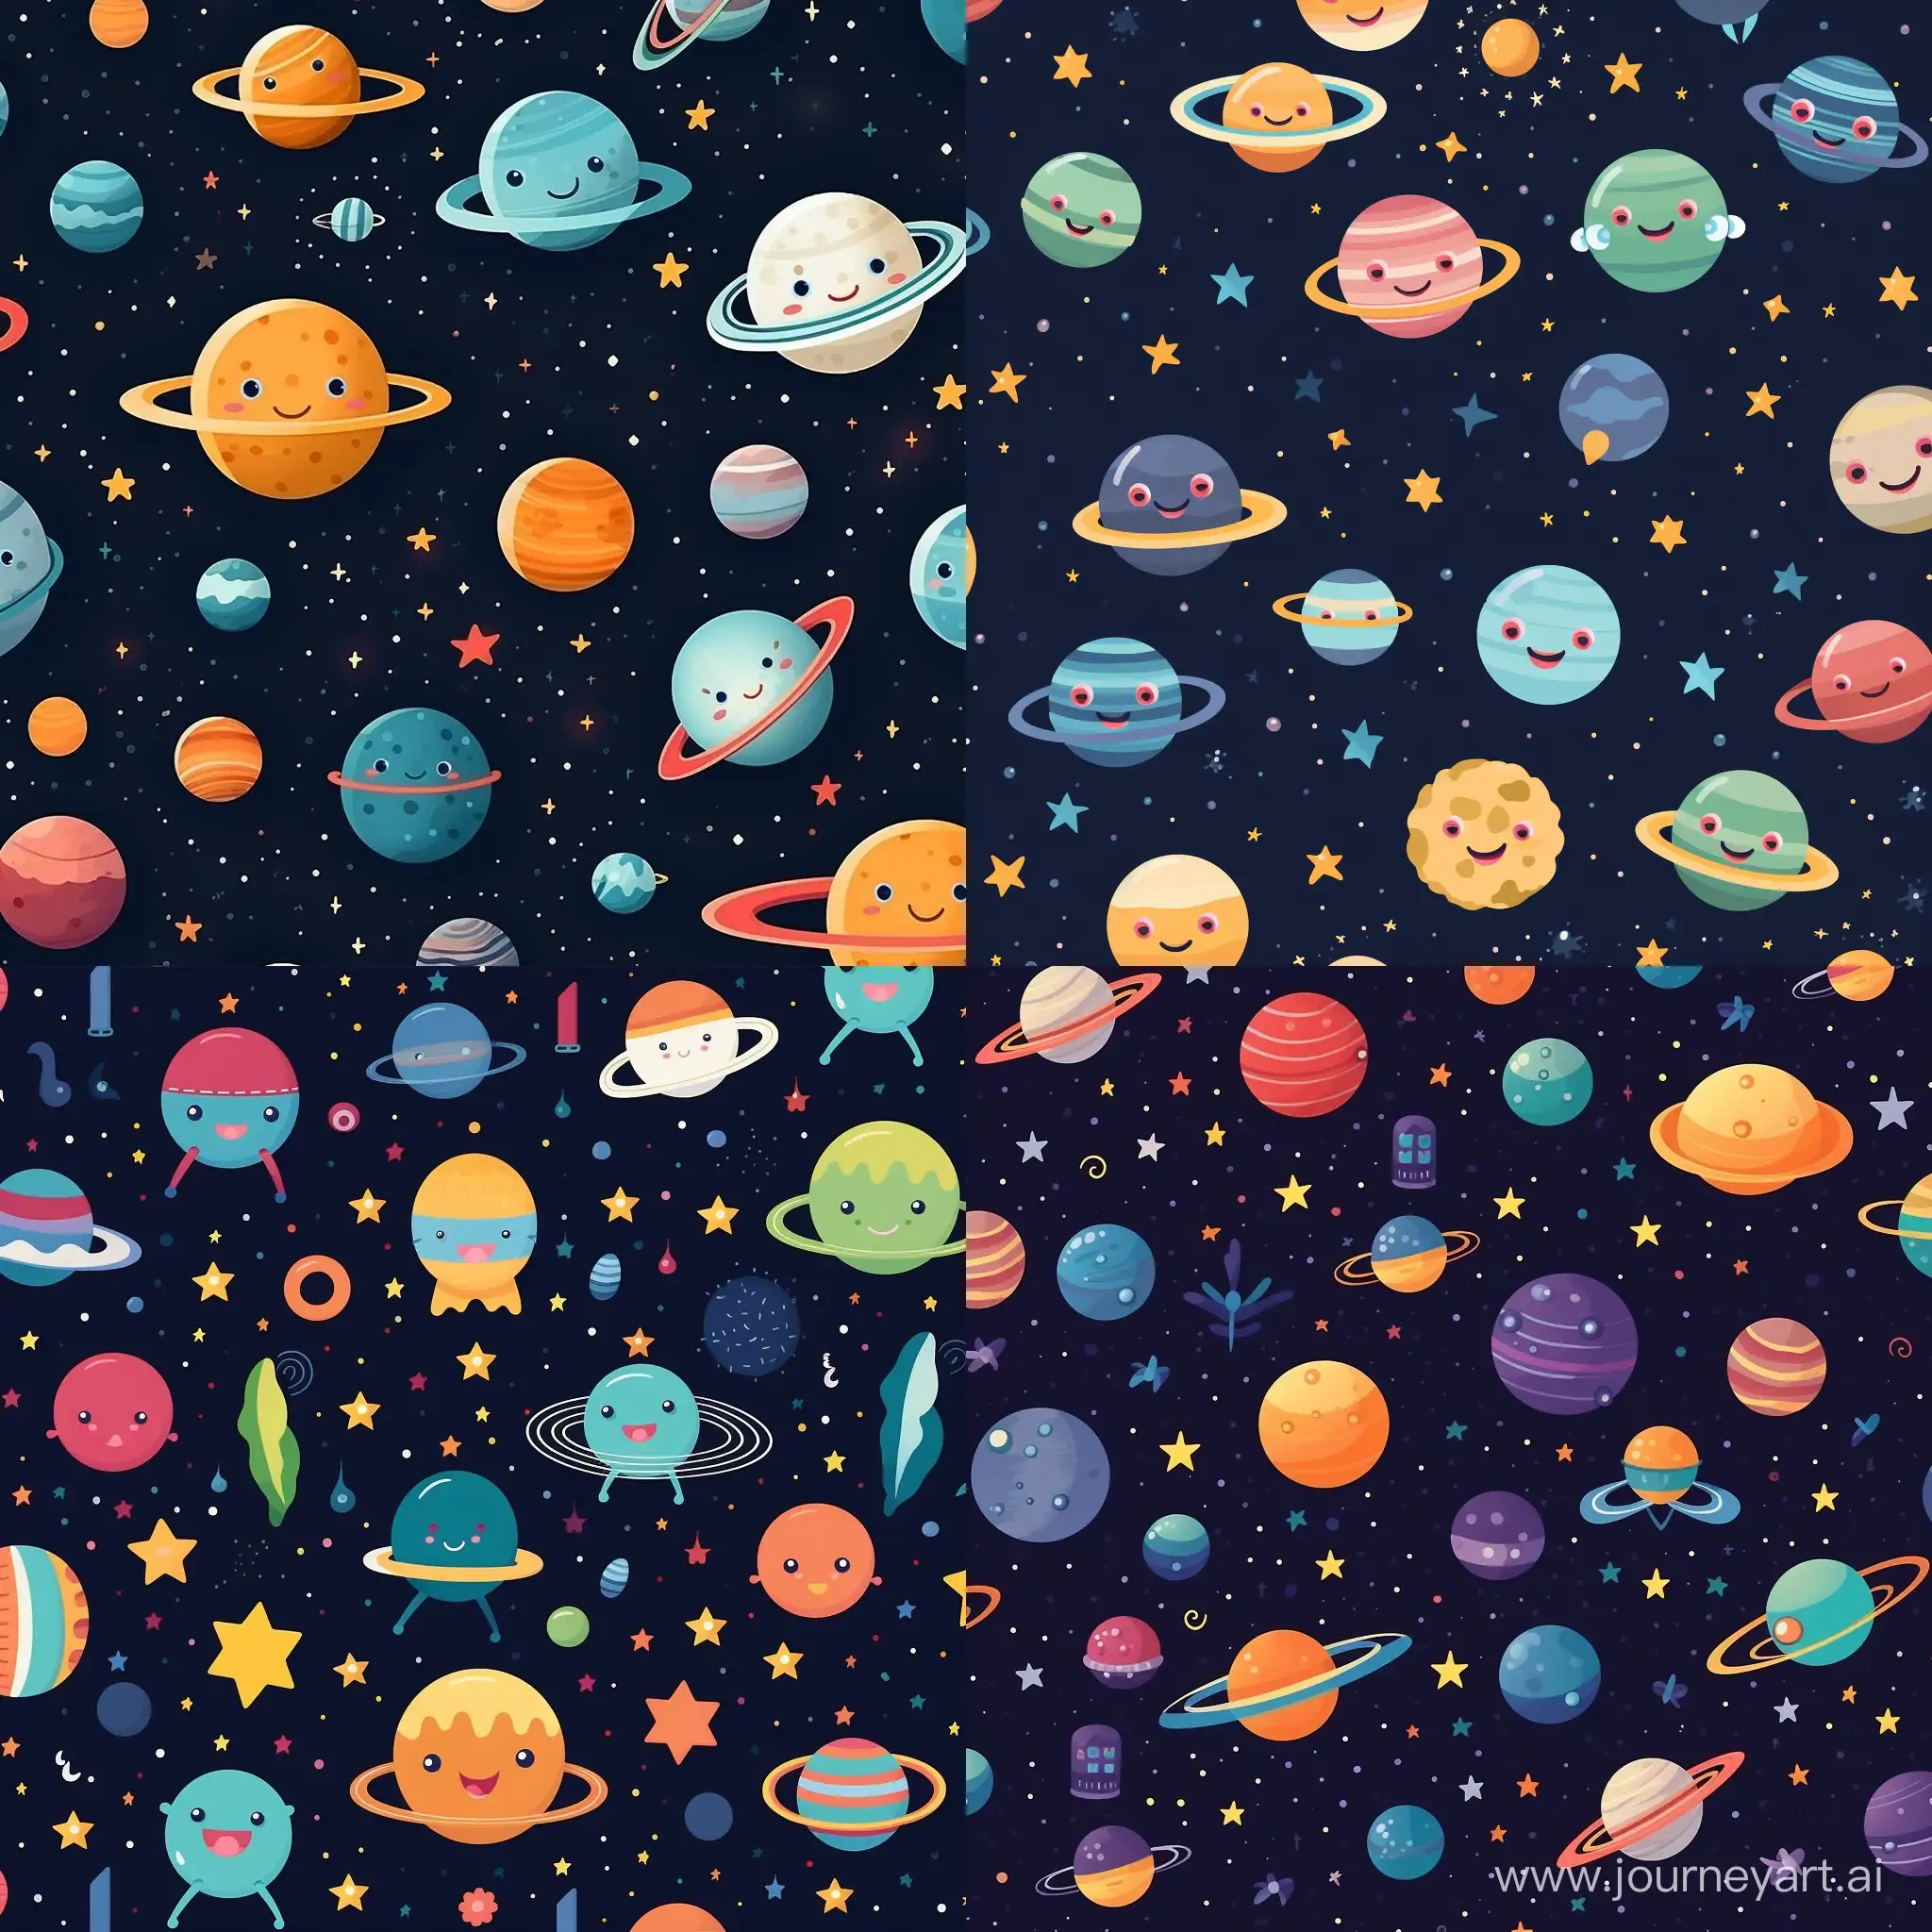 Adorable-Space-Pattern-Artwork-in-Square-Aspect-Ratio